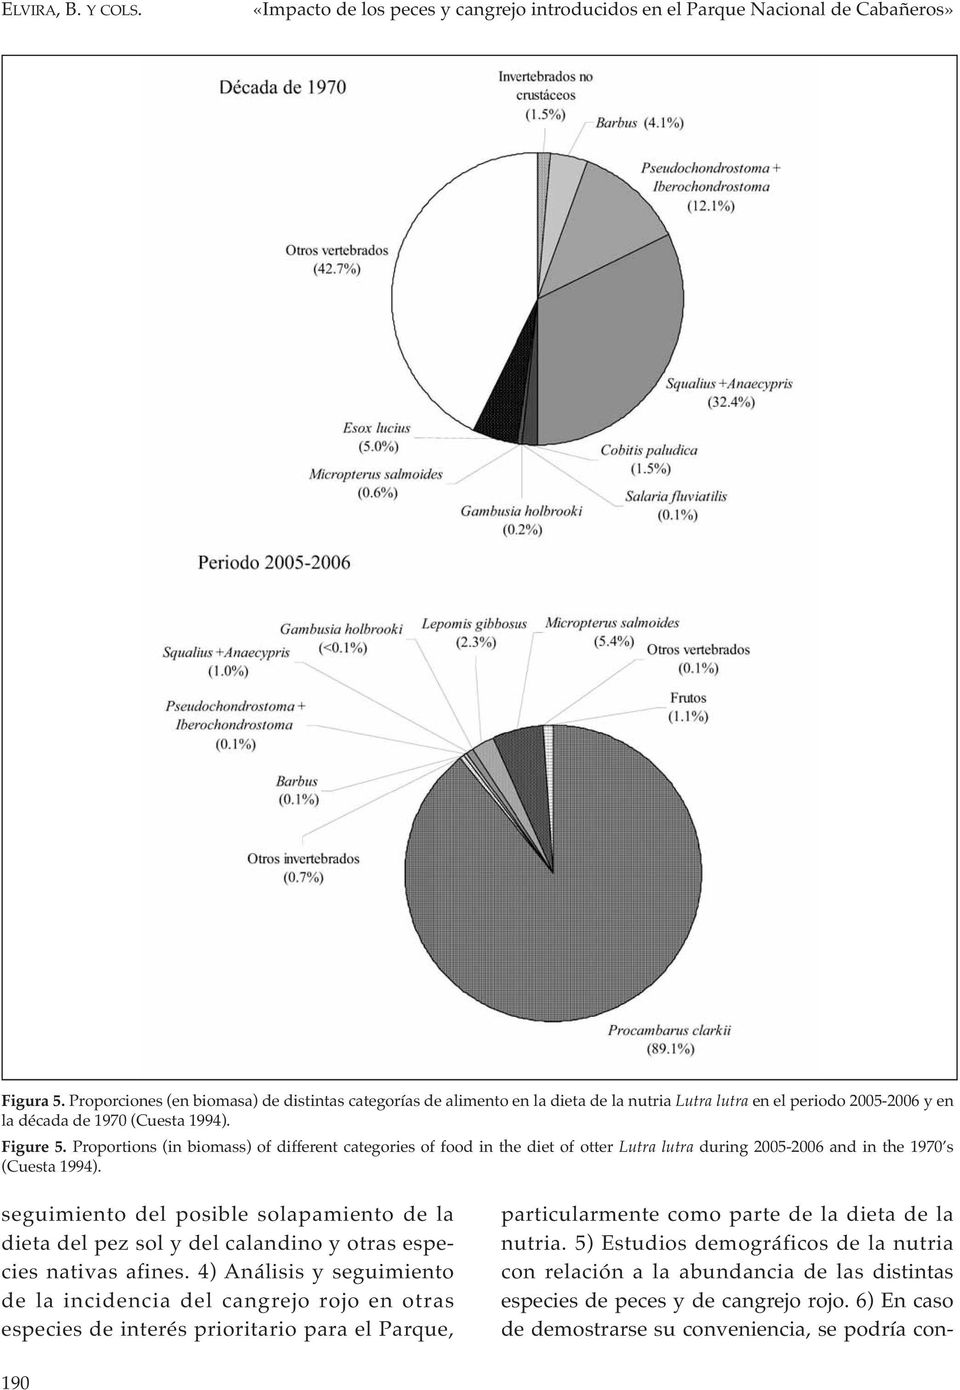 Proportions (in biomass) of different categories of food in the diet of otter Lutra lutra during 2005-2006 and in the 1970 s (Cuesta 1994).